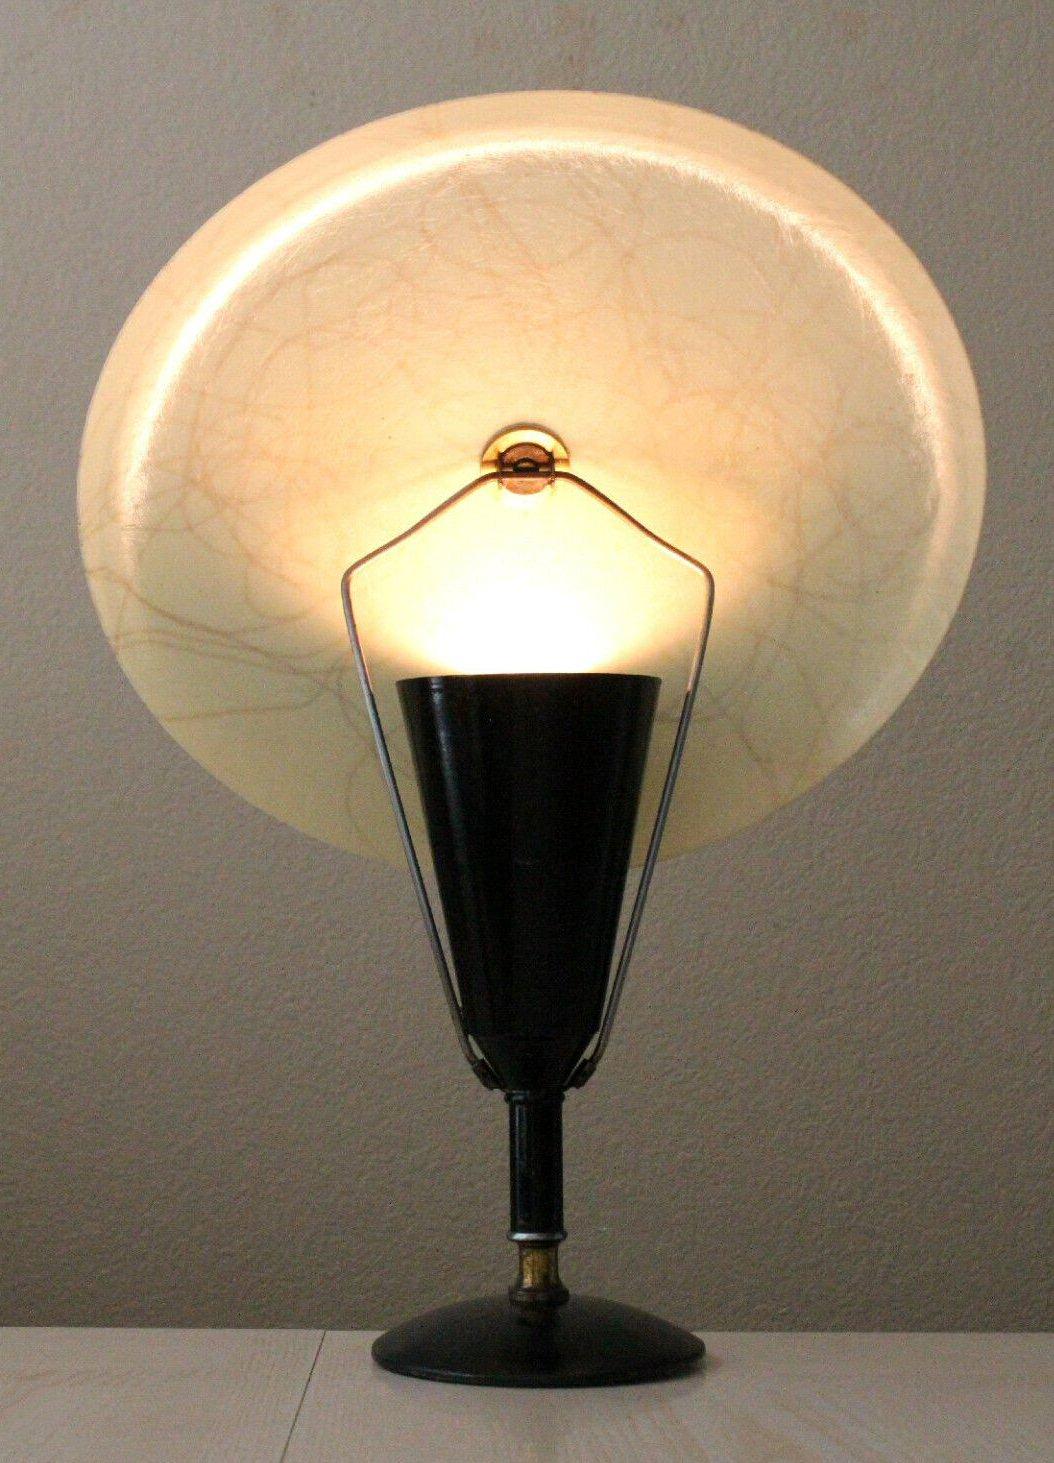  A  PURIST'S DREAM.

MID CENTURY MODERN
MOLDED FIBERGLASS
ARTICULATING SHADE
REFLECTOR DESK LAMP!

Attributed to Bill Lam Workshop
1950

(DIMENSIONS: 14